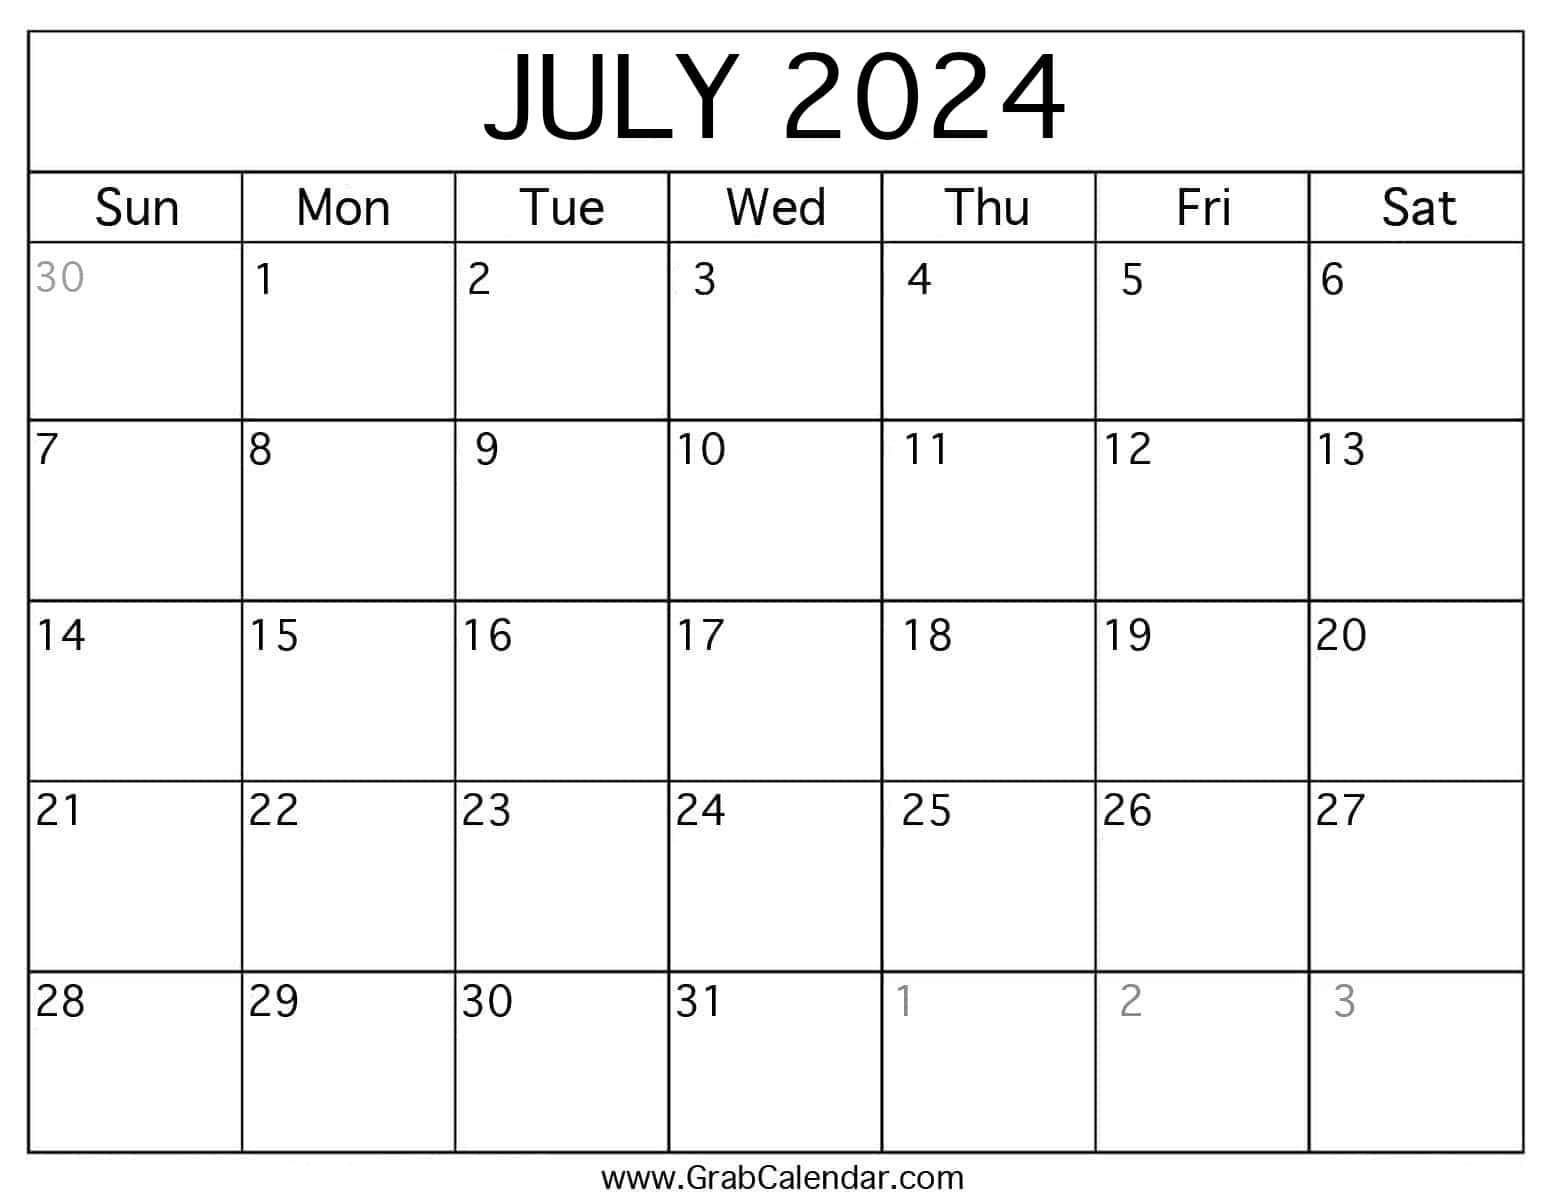 Printable July 2024 Calendar pertaining to Show Me a Calendar For June and July 2024